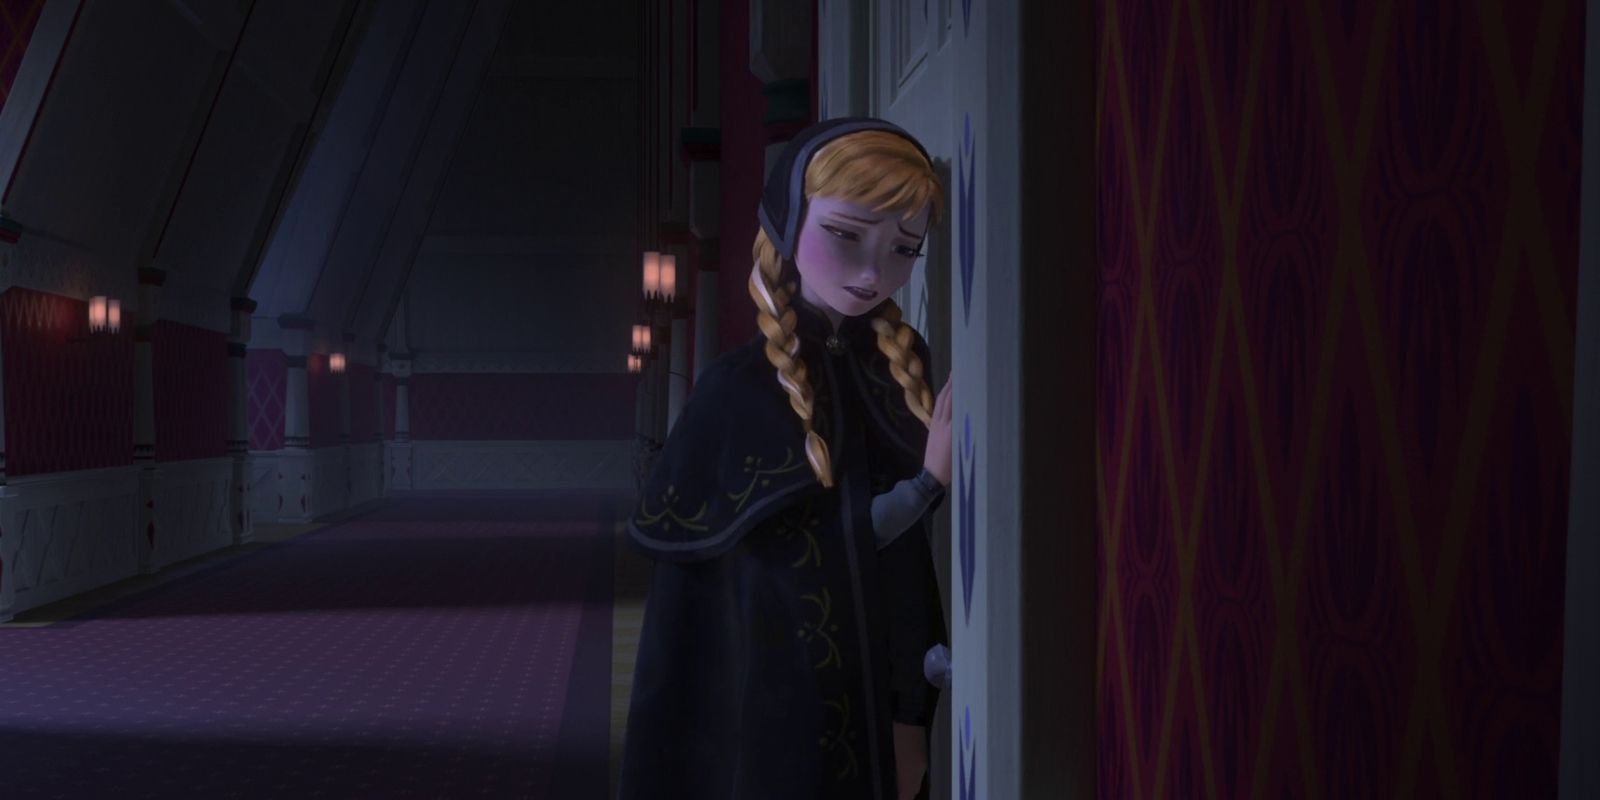 Frozen: Do You Want to Build a Snowman? 